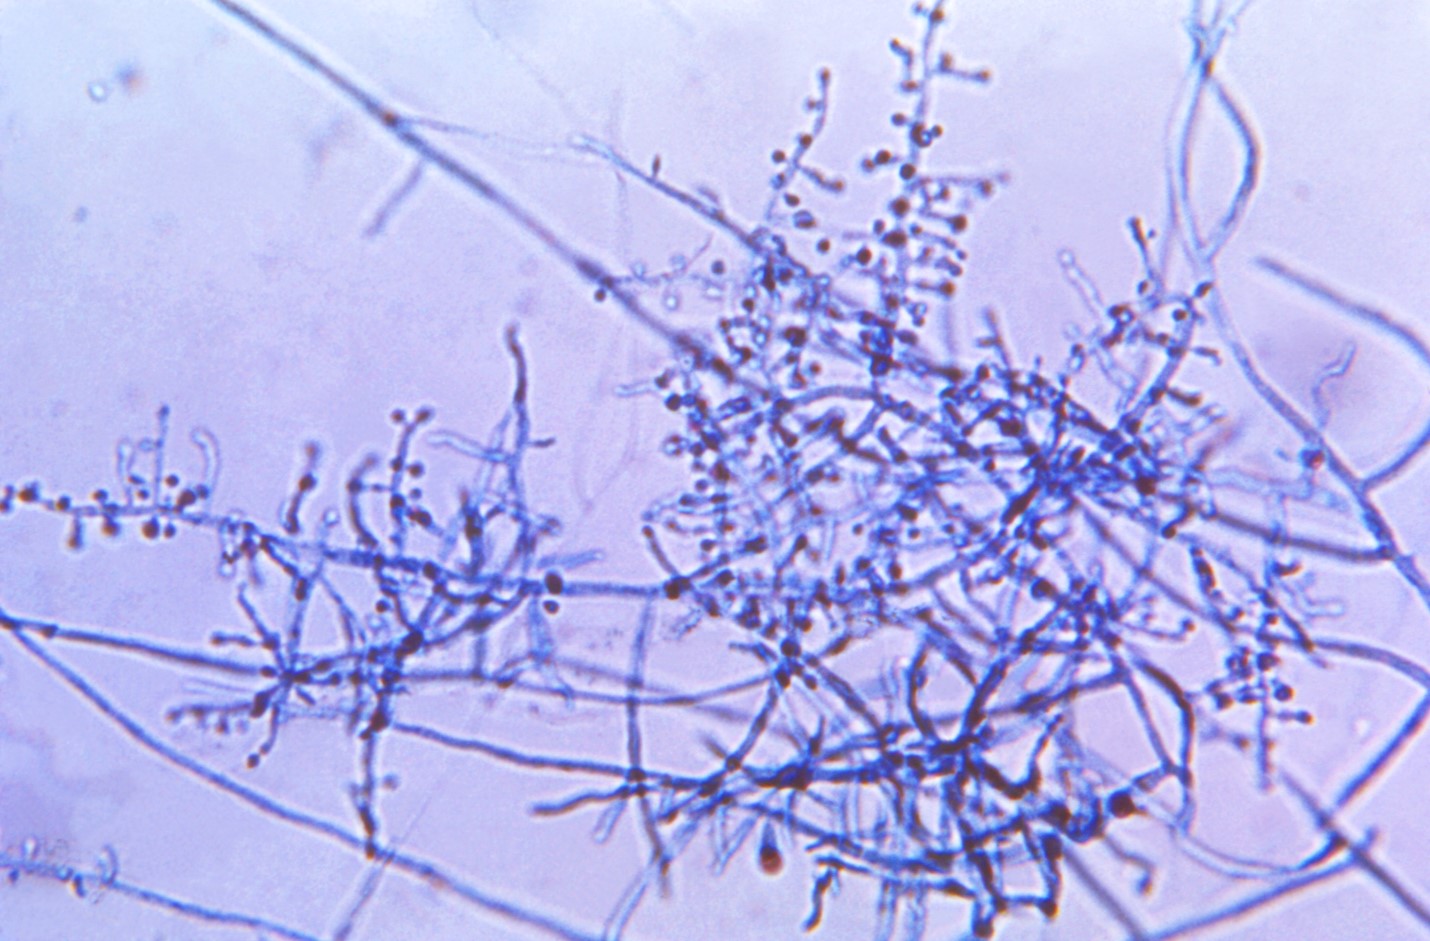 Under a magnification of 475X, this photomicrograph revealed some of the ultrastructural morphology exhibited by the dermatophytic fungal organism, Trichophyton mentagrophytes